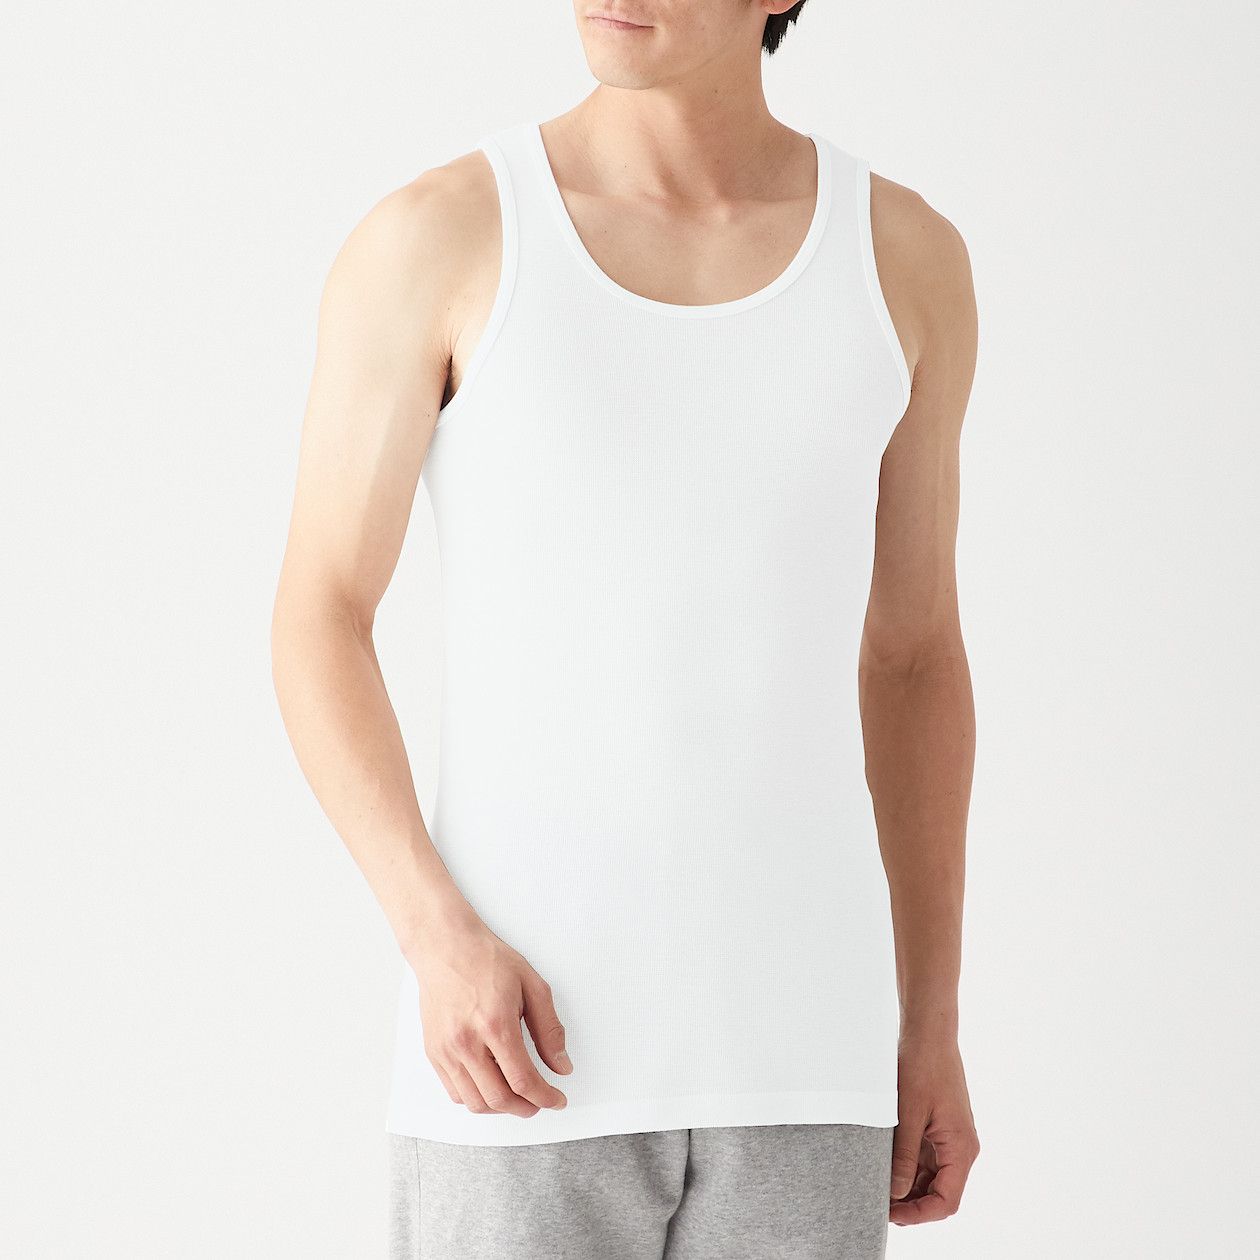 There is a need to mask absorption 8 Best Men's Tank Tops 2021 | The Strategist